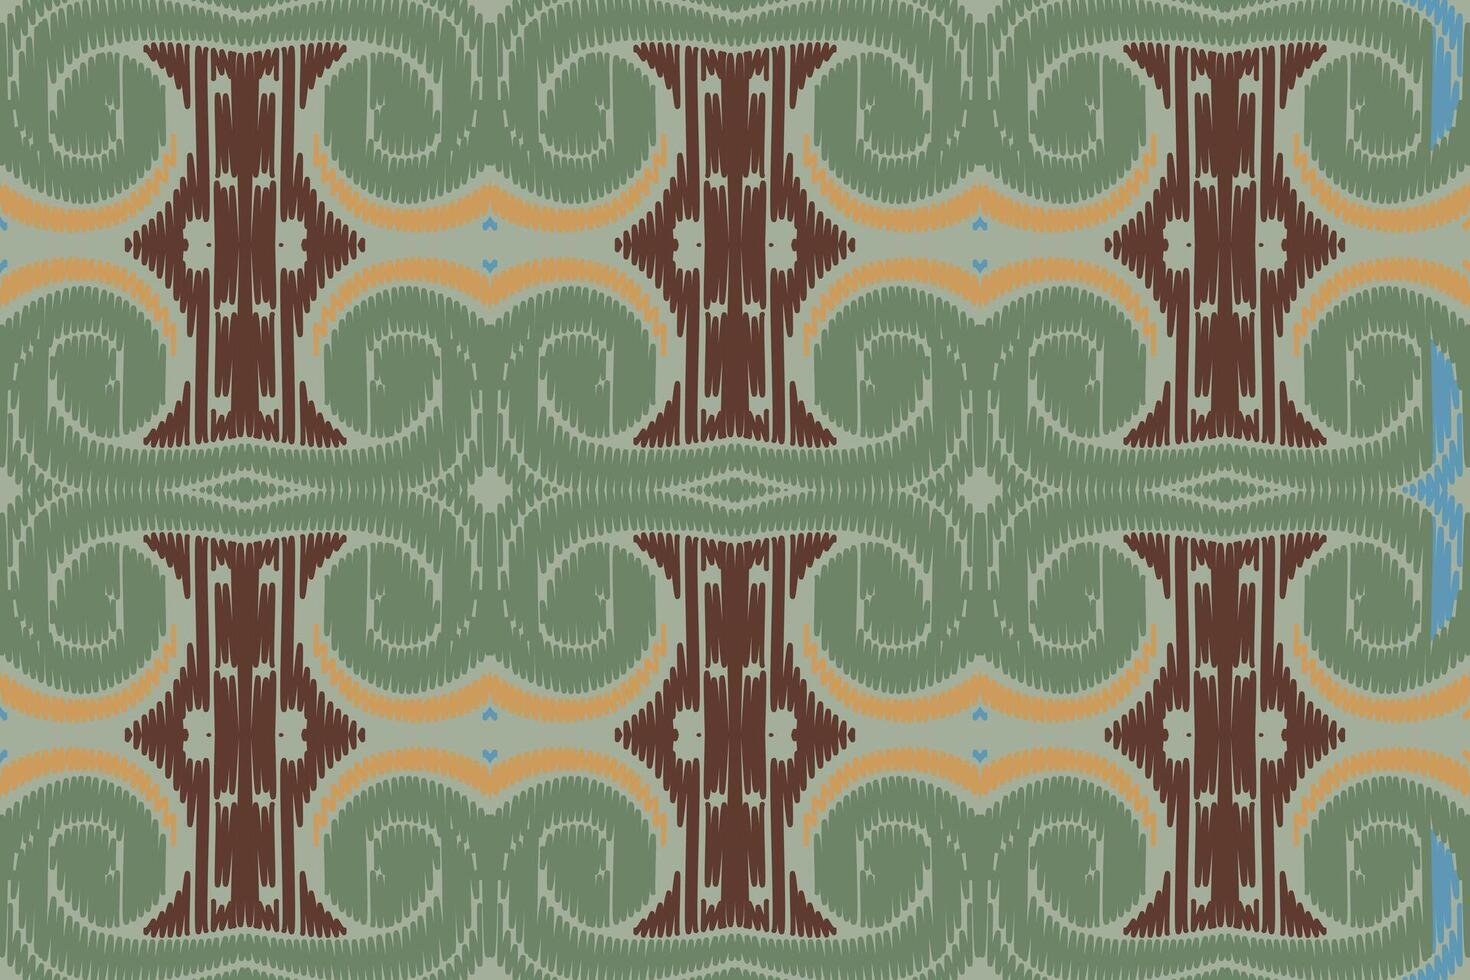 Ethnic ikat seamless pattern in tribal. Design for background, wallpaper, vector illustration, fabric, clothing, carpet, textile, batik, embroidery.